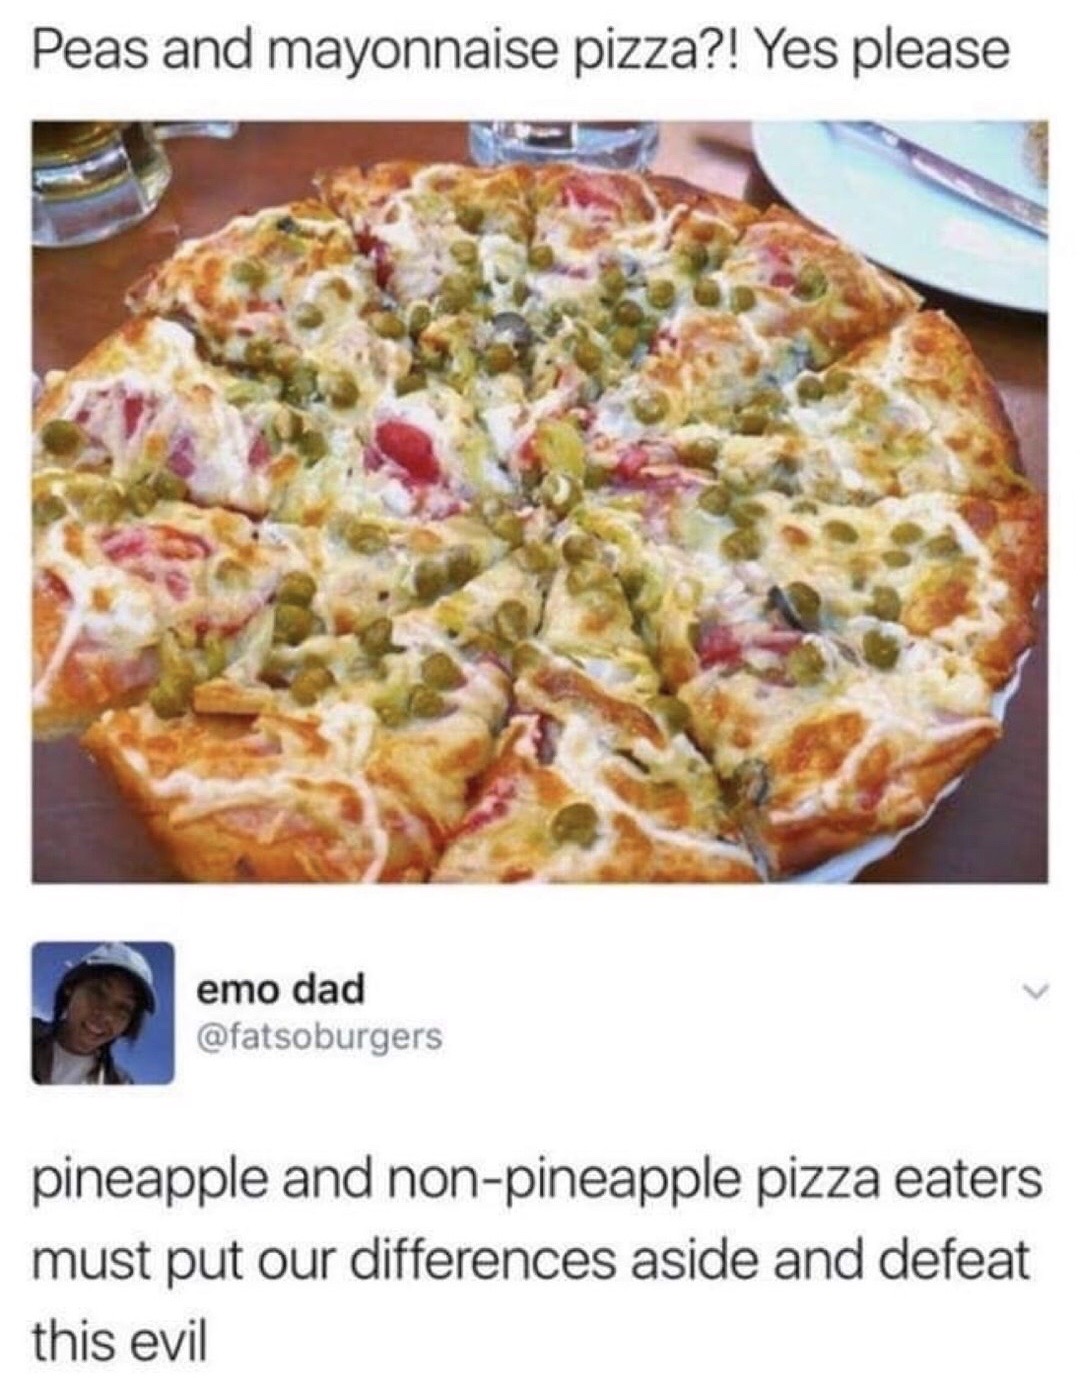 mayo and peas pizza - Peas and mayonnaise pizza?! Yes please emo dad emod pineapple and nonpineapple pizza eaters must put our differences aside and defeat this evil